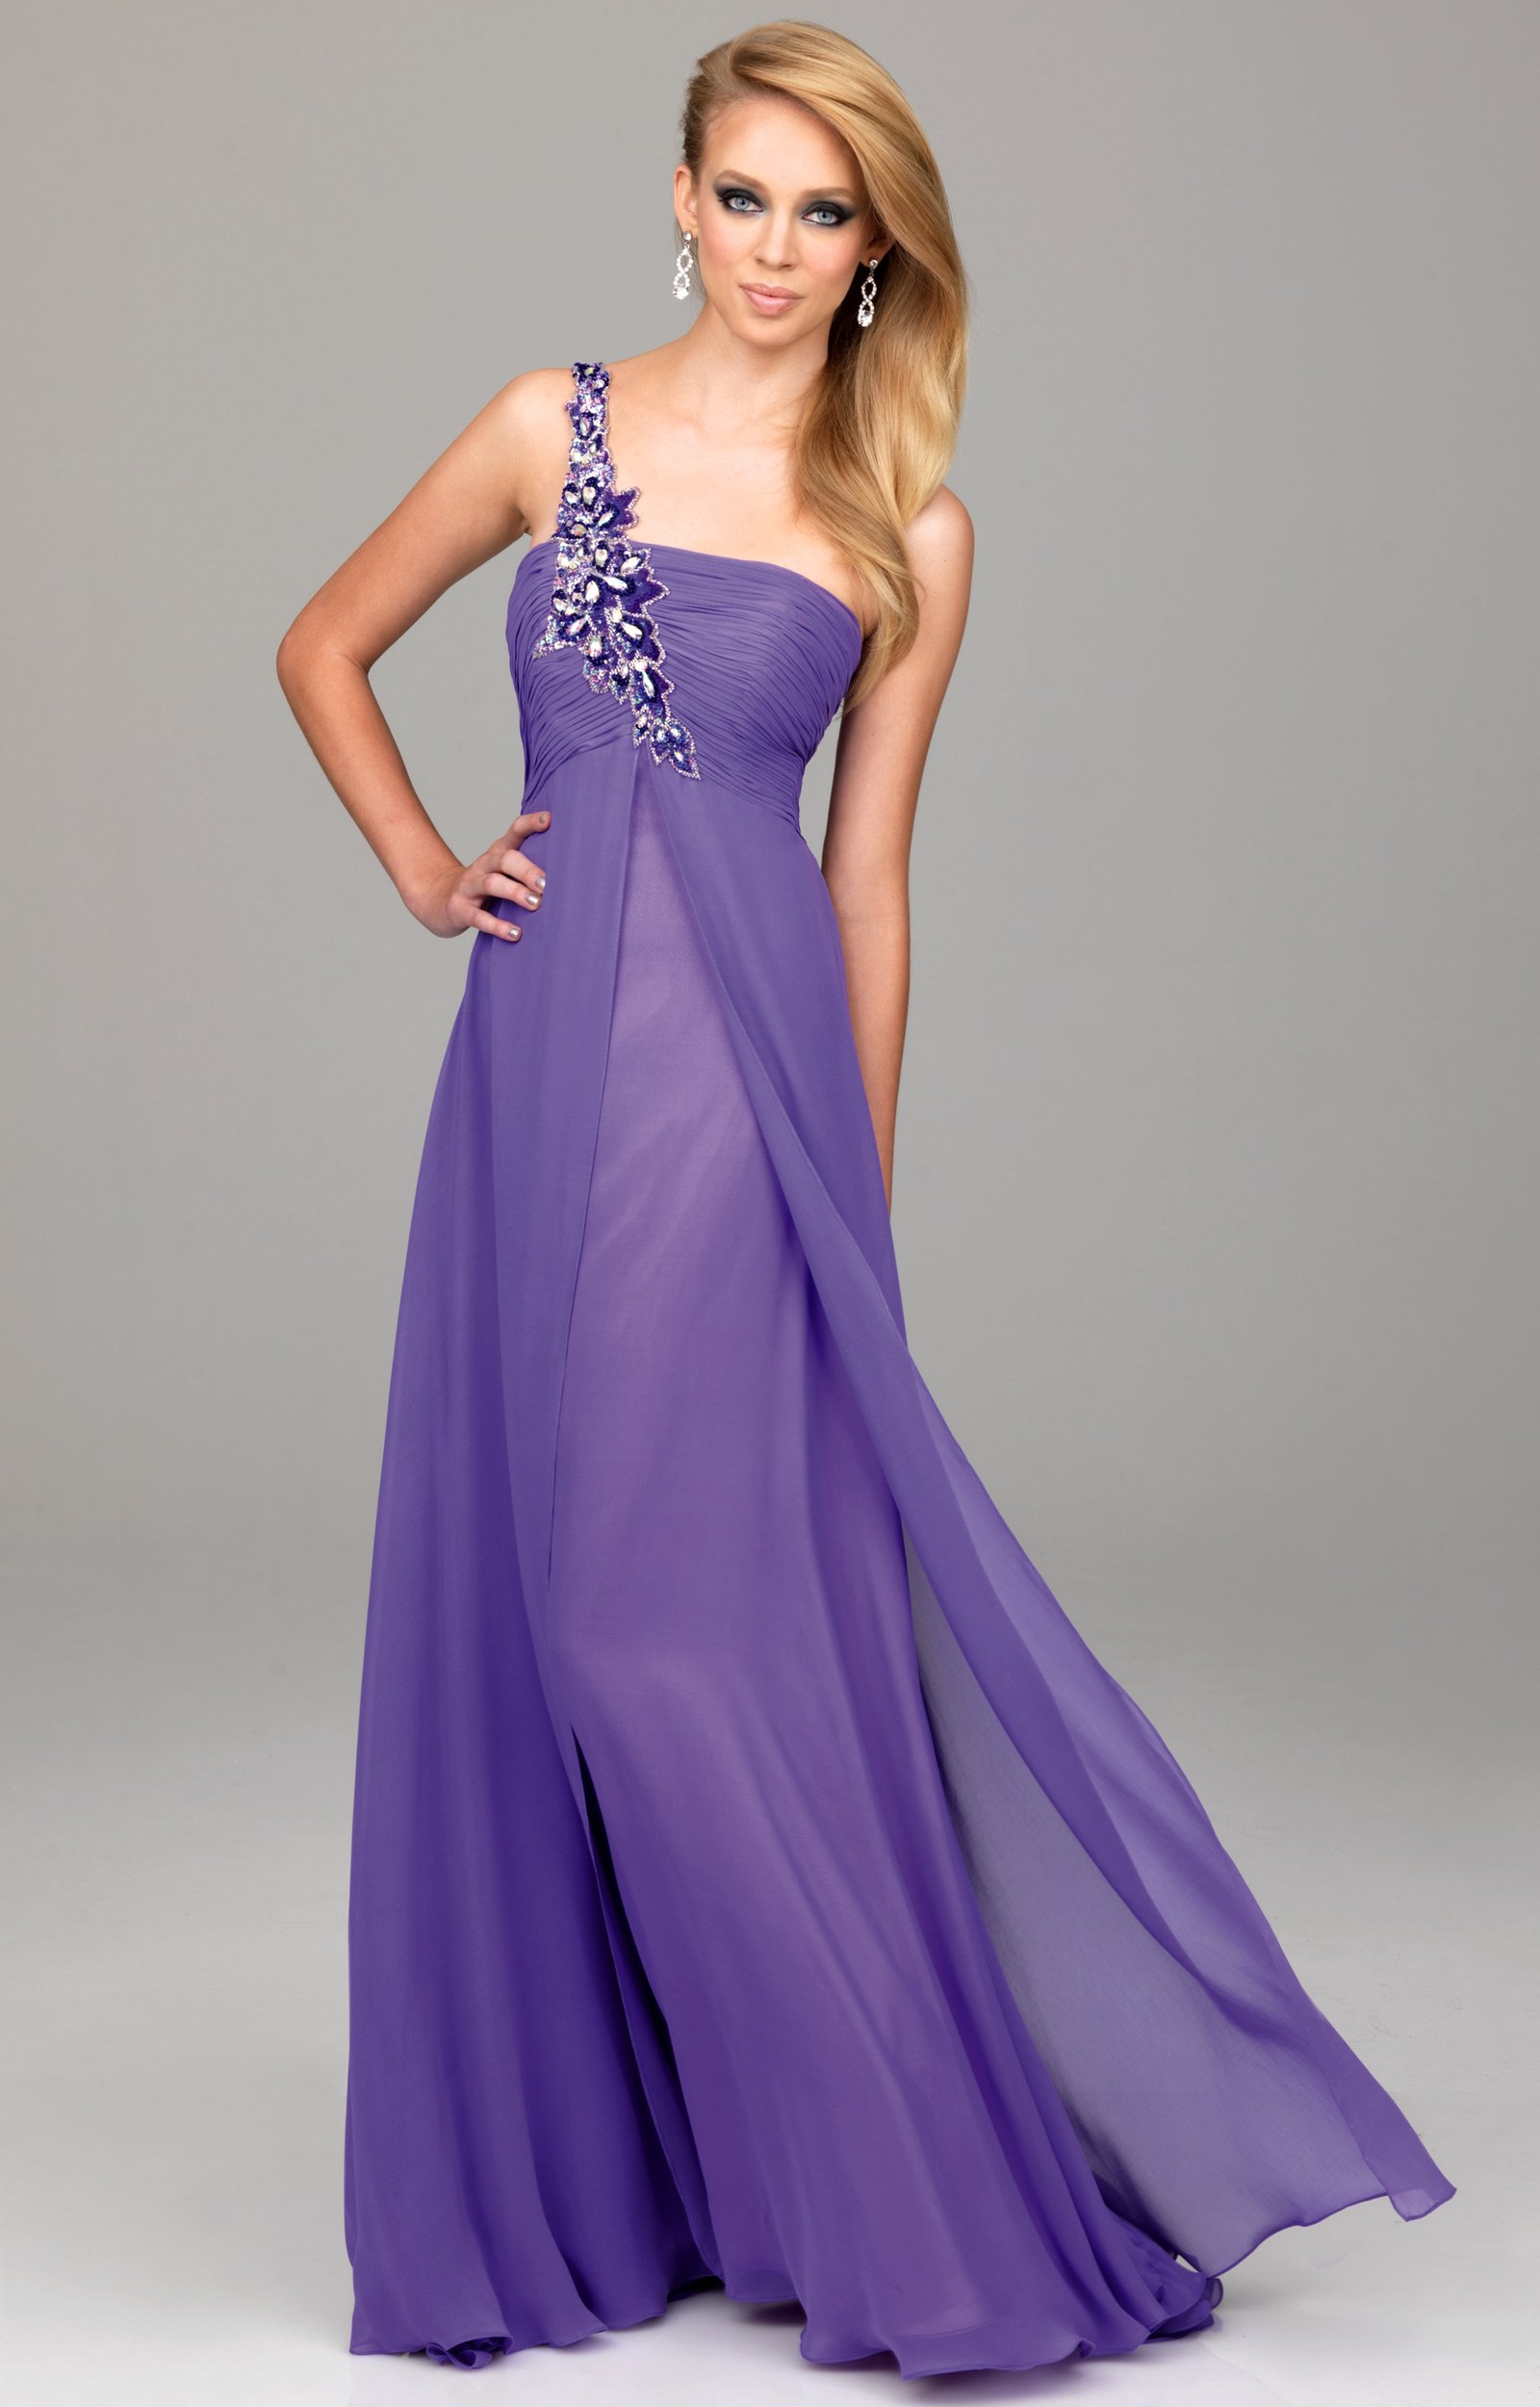 Beautiful Party Dresses that are Sure to Turn Heads - Ohh My My